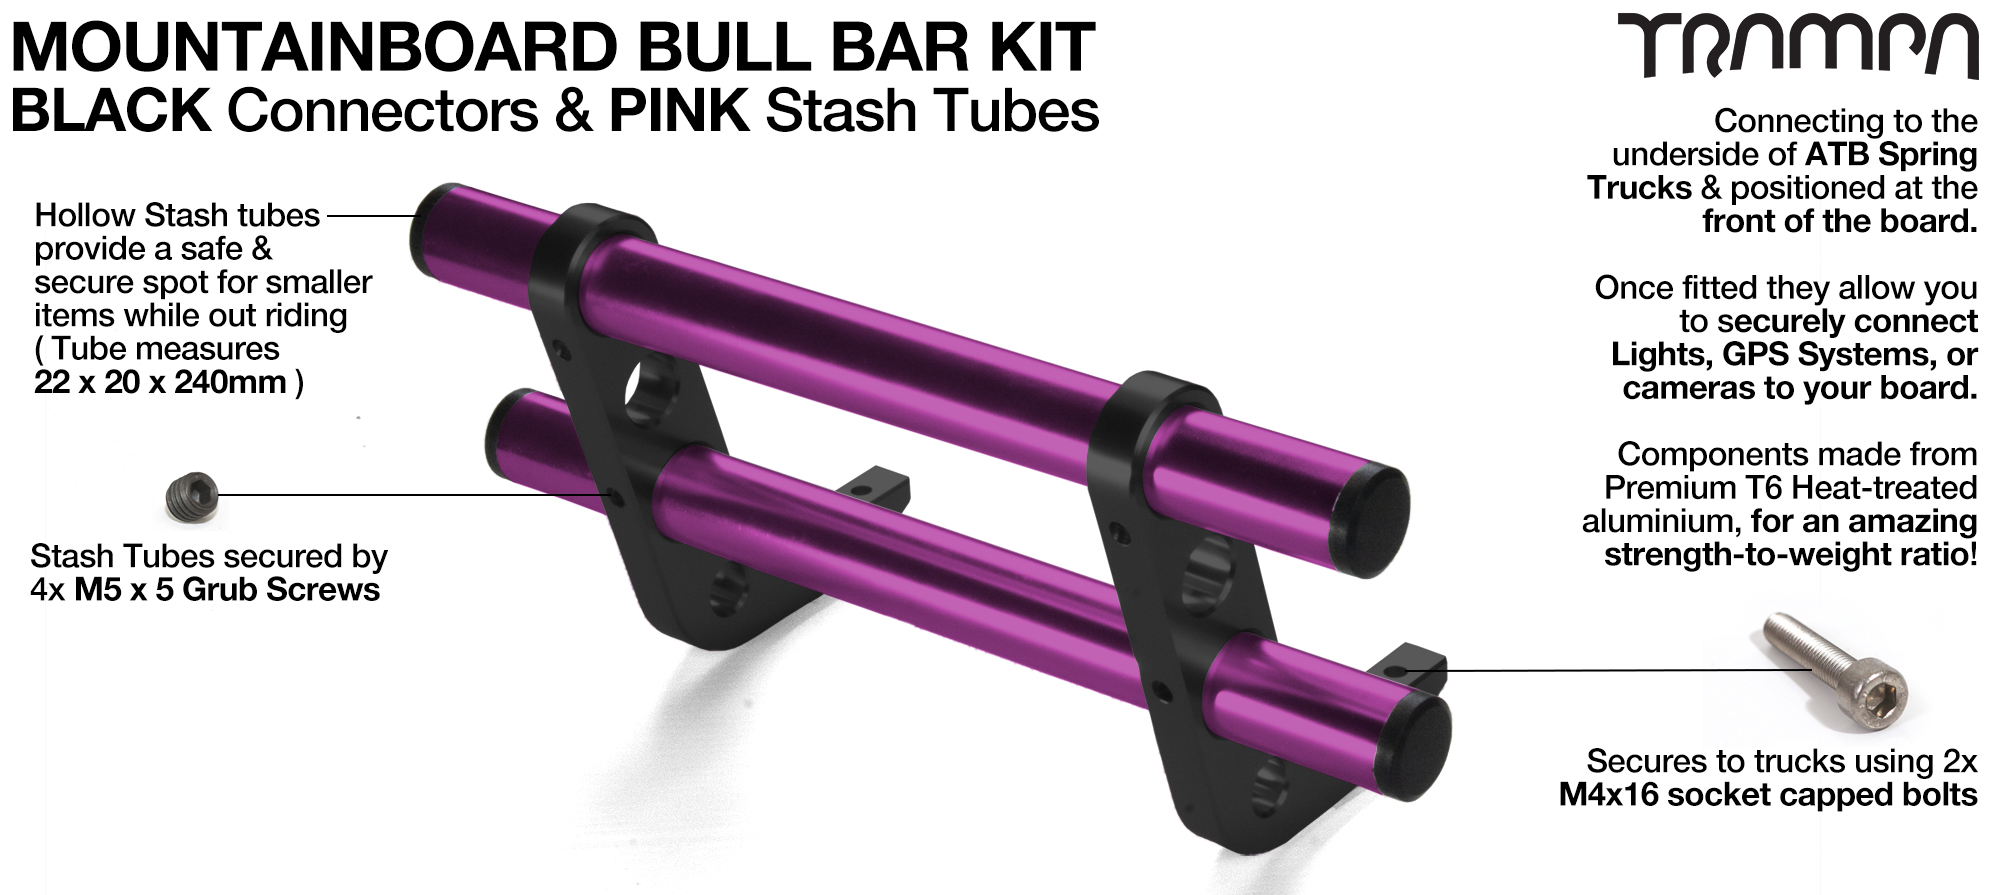 BLACK Uprights  &PINK Crossbar BULL BARS for MOUNTAINBOARDS using T6 Heat Treated CNC'd AluminIum Clamps, Hollow Aluminium Stash Tubes with Rubber end bungs 